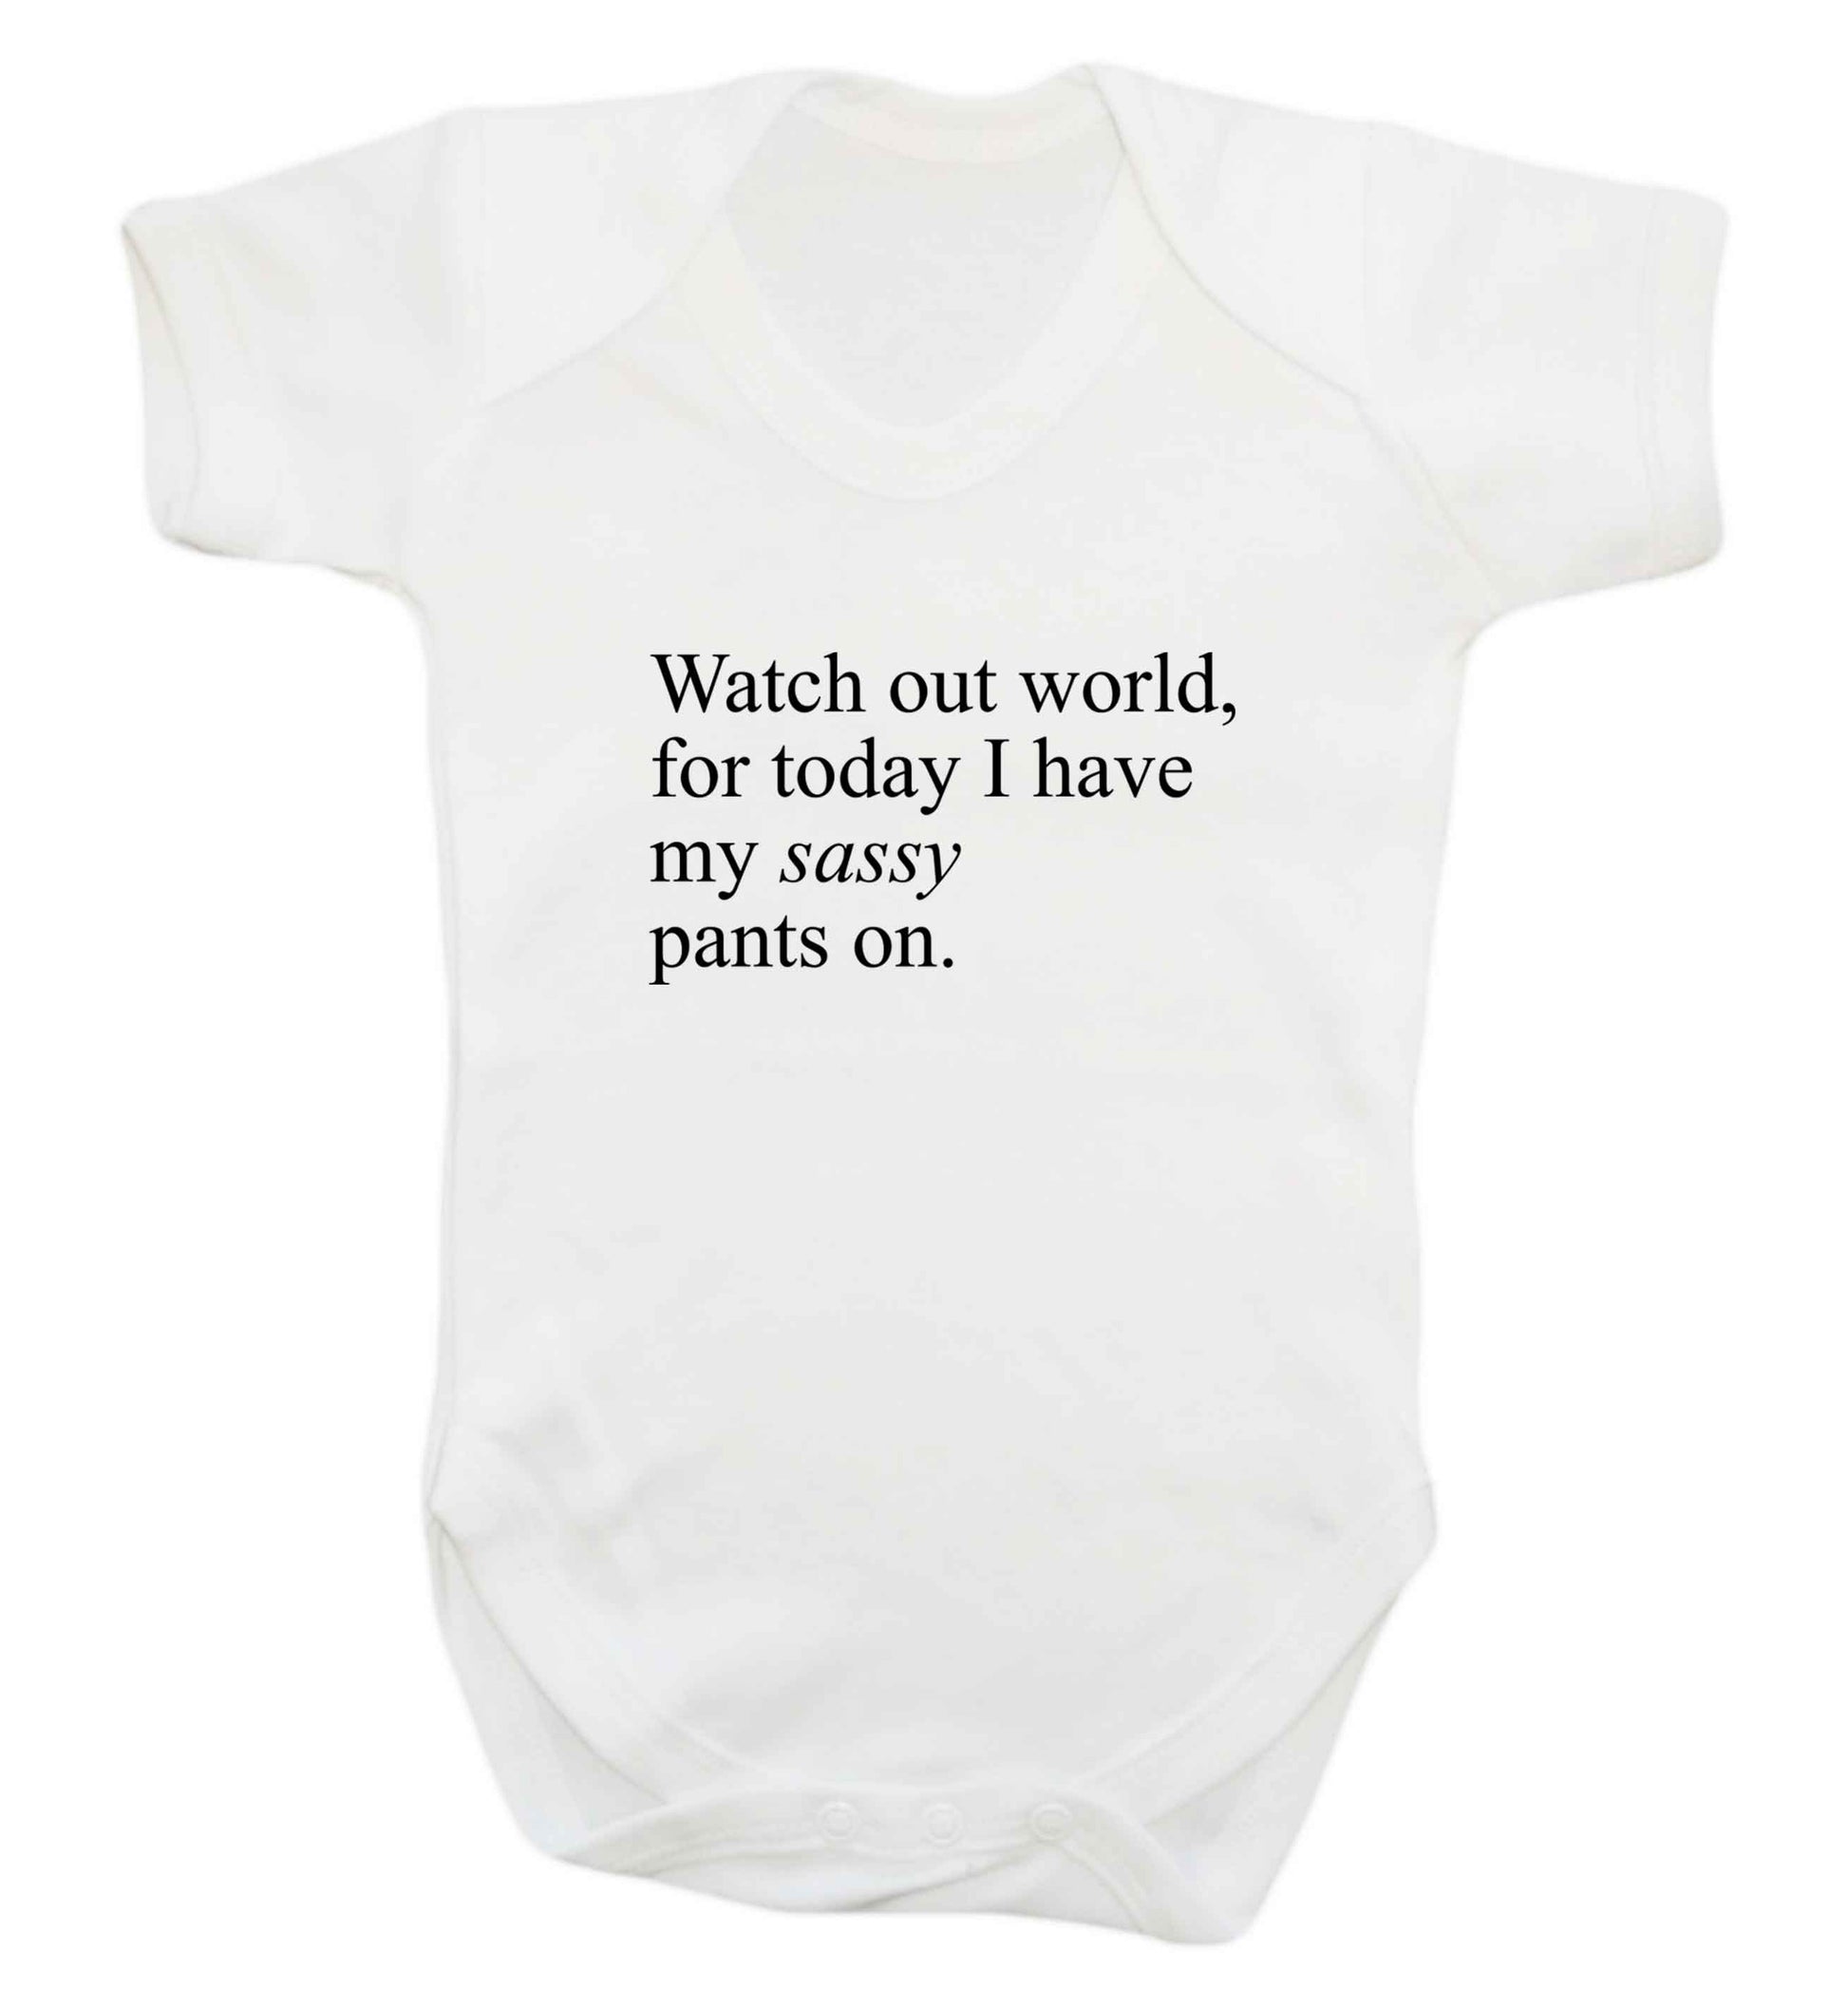 Watch out world for today I have my sassy pants on baby vest white 18-24 months